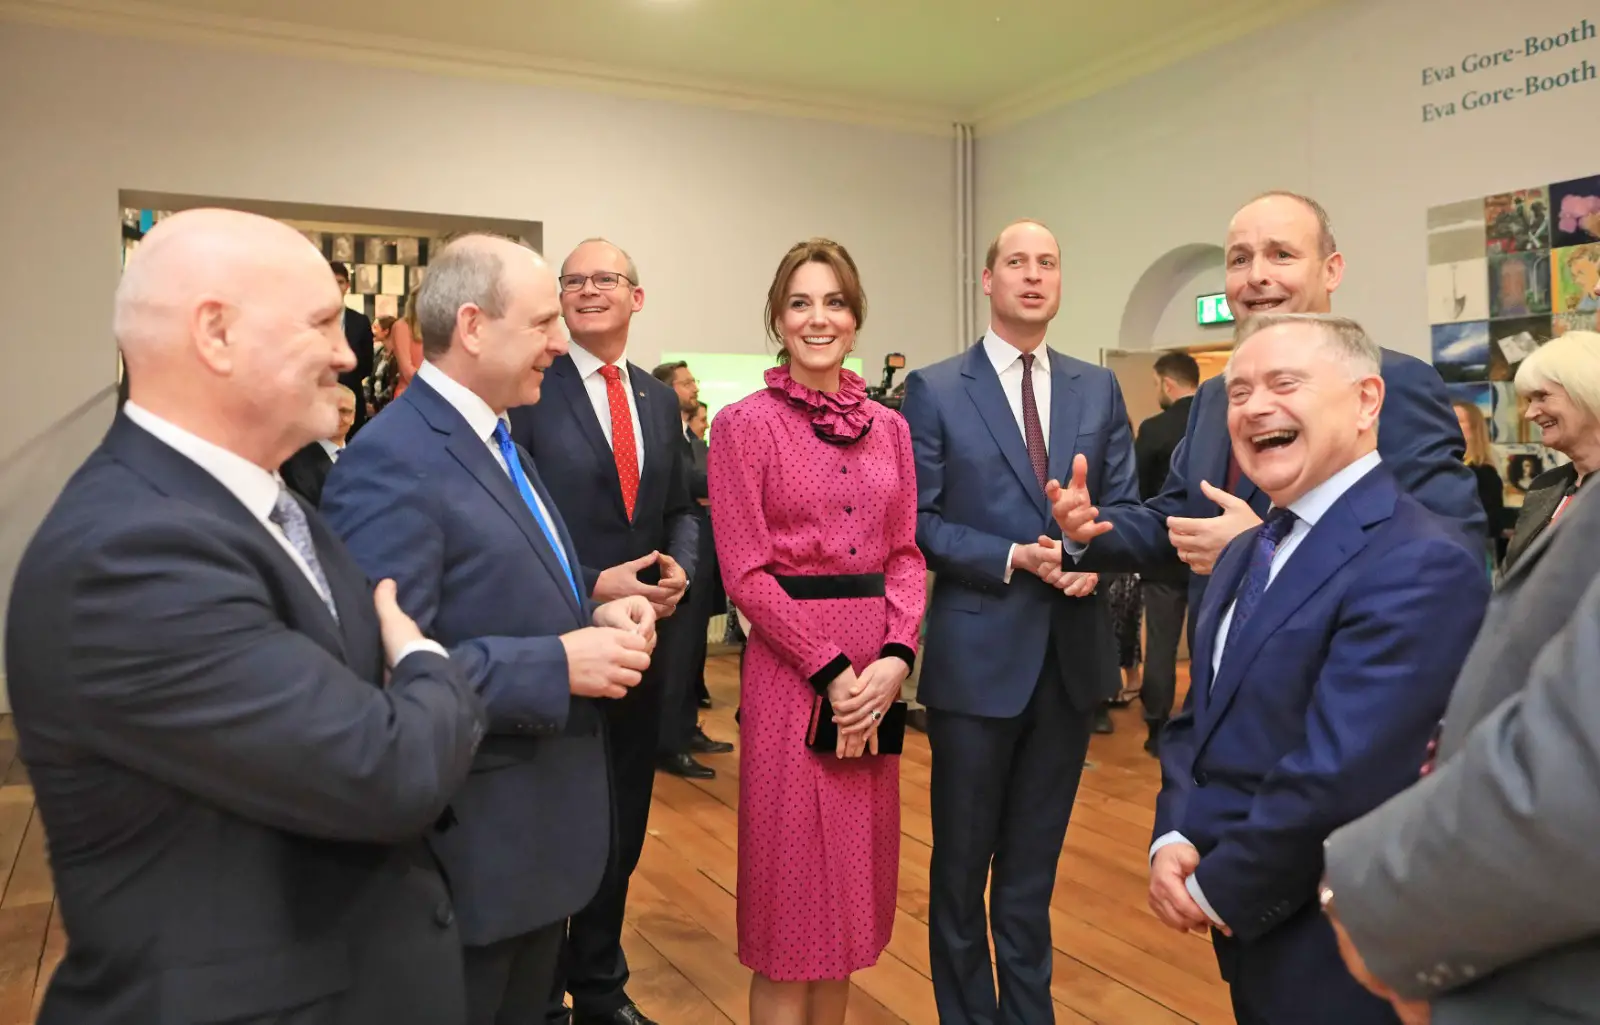 Duke and Duchess of Cambridge attended the reception hosted at he Museum of Literature Ireland